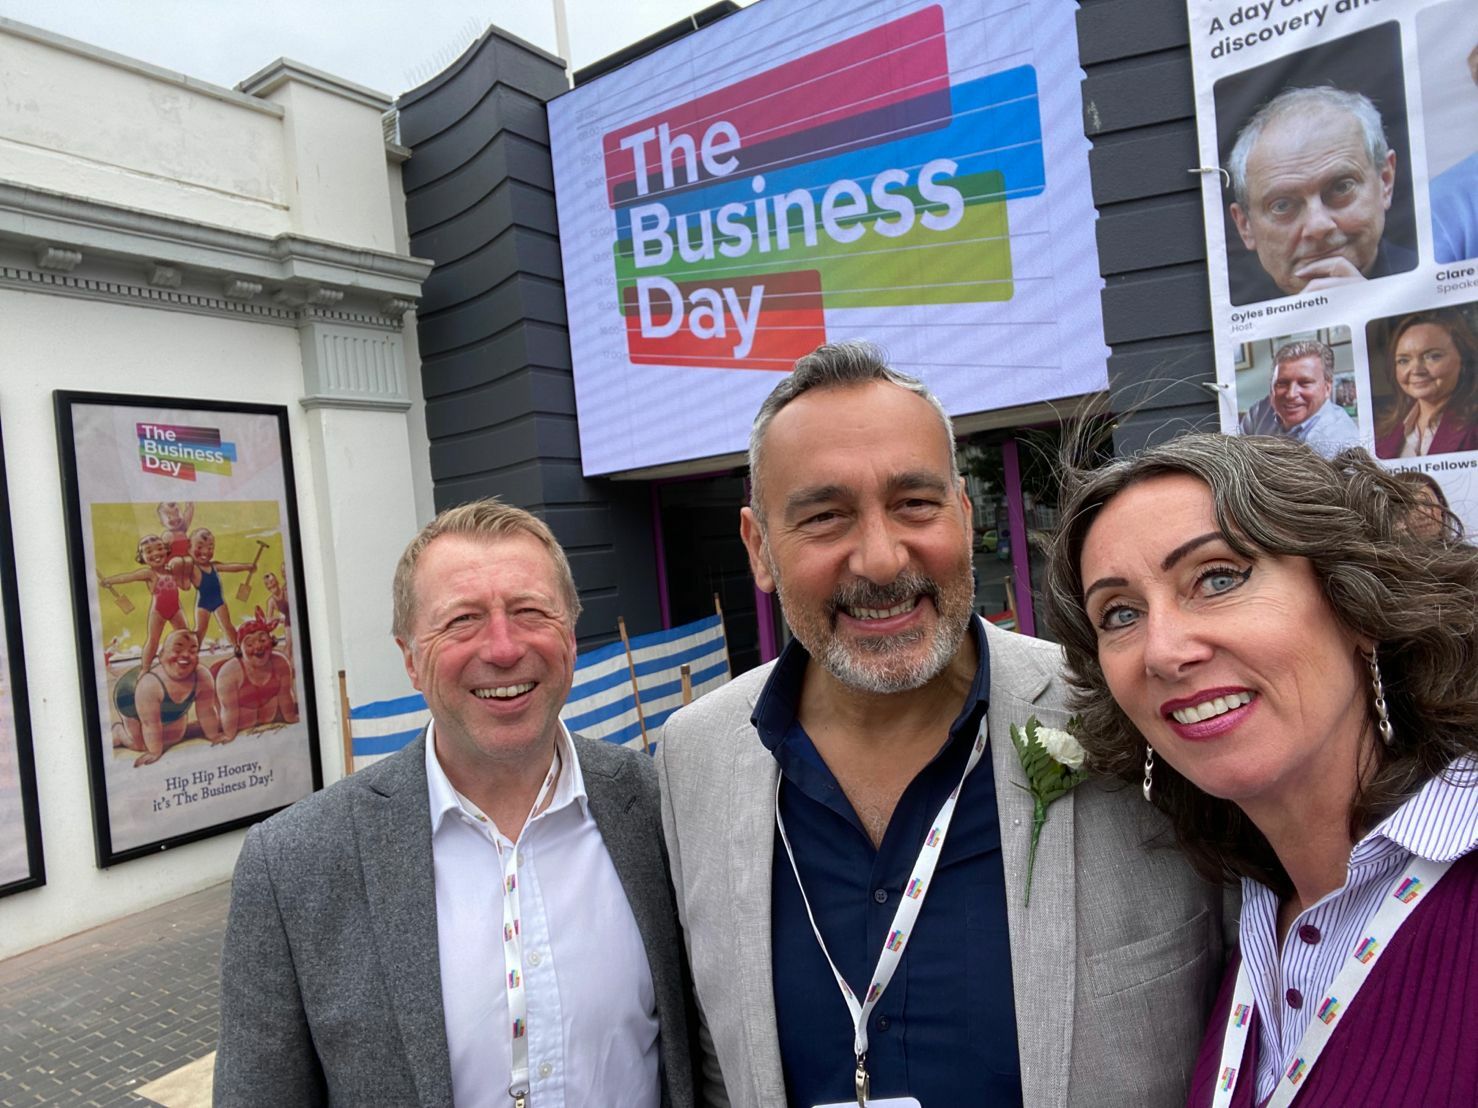 D3's Martin Shaw and ACA's Alex and Amelia Caruso outside the Bridlington Spa at the Business Day 2023.